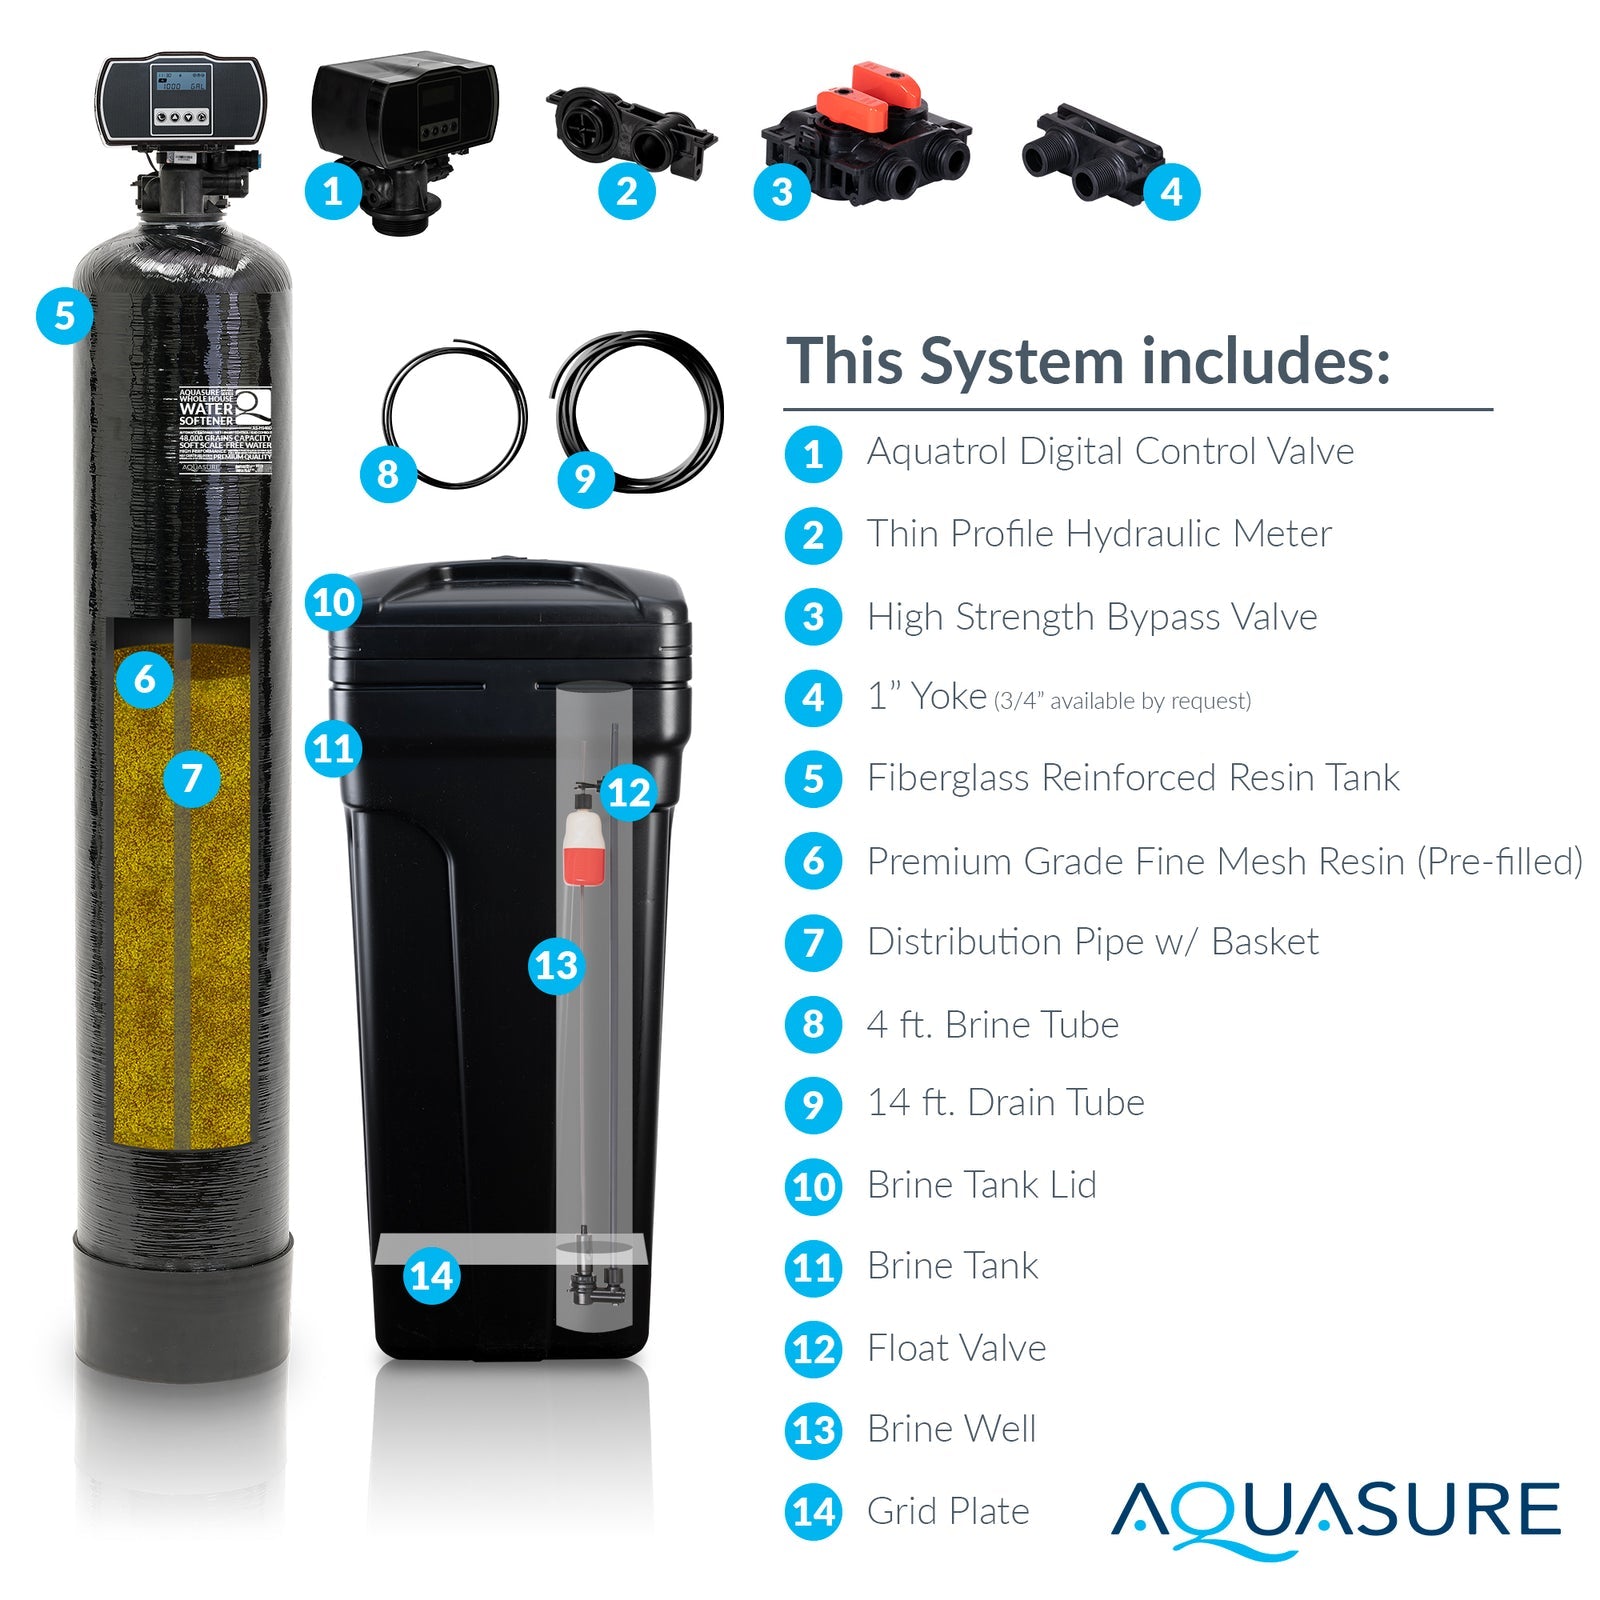 Aquasure, Aquasure AS-HS48FM Harmony Series 48,000 Grain Water Softener with Fine Mesh Resin for Iron Removal New